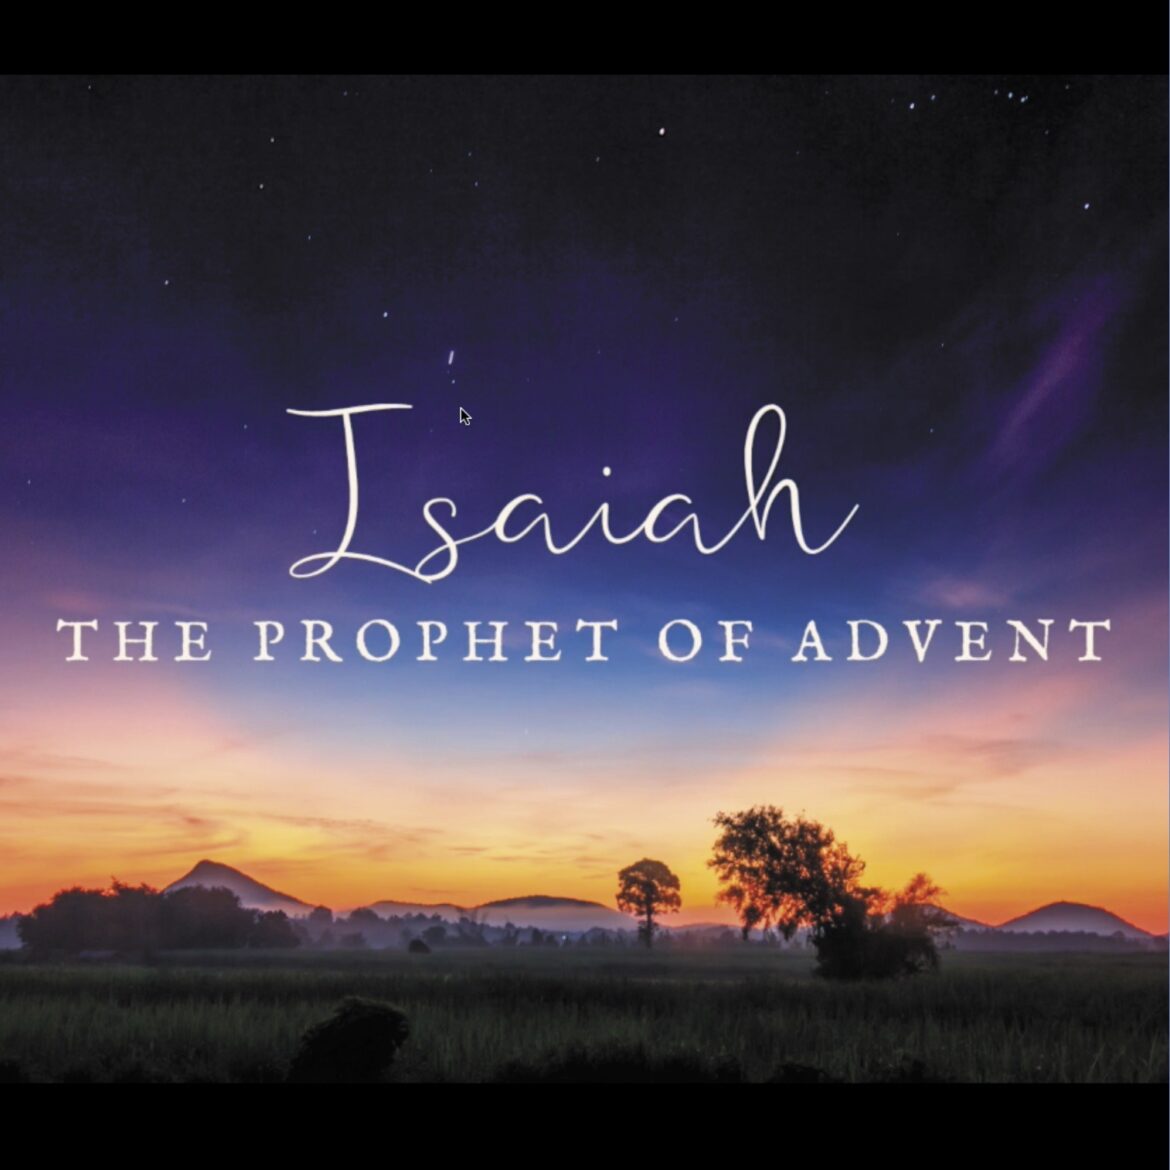 Isaiah, the Prophet of Advent